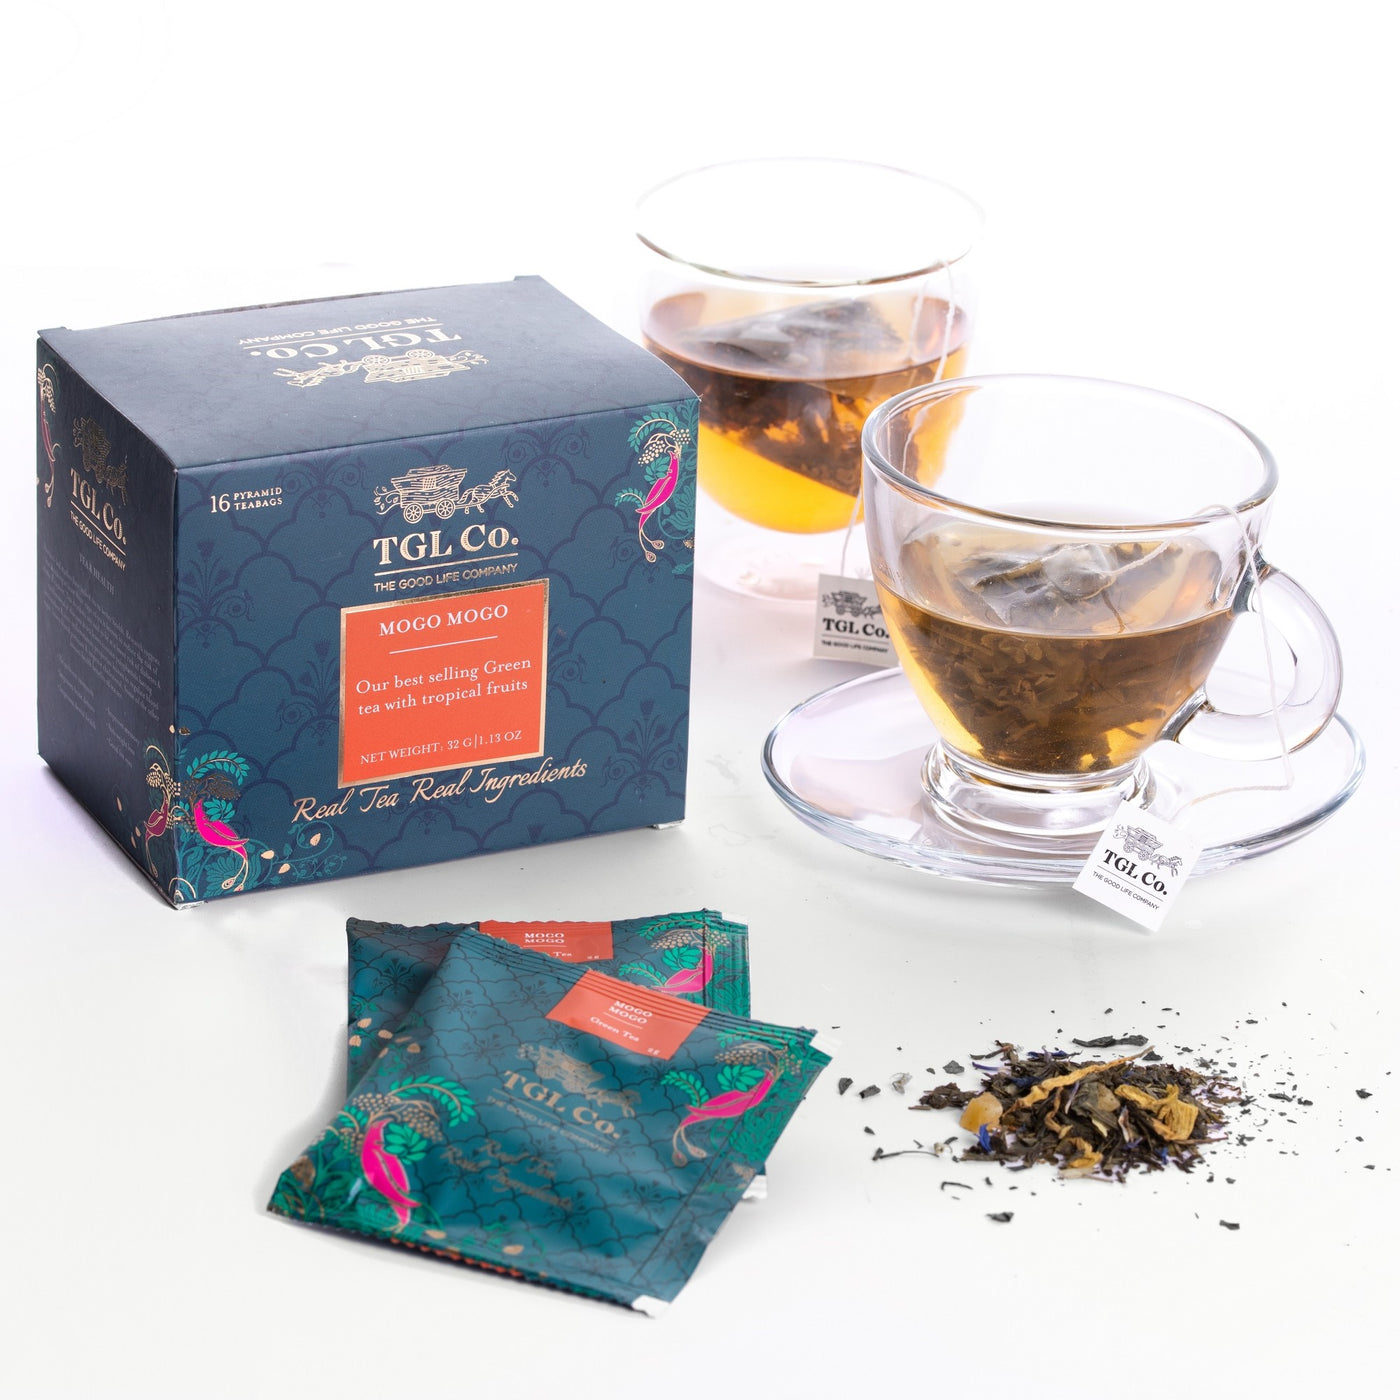 The Coffee Bean  Tea Leaf Philippines  Taste the flavors of Paradise  with our newest tea  Enjoy this refreshing limited edition blend of  Philippine tropical fruits and Rooibos tea made